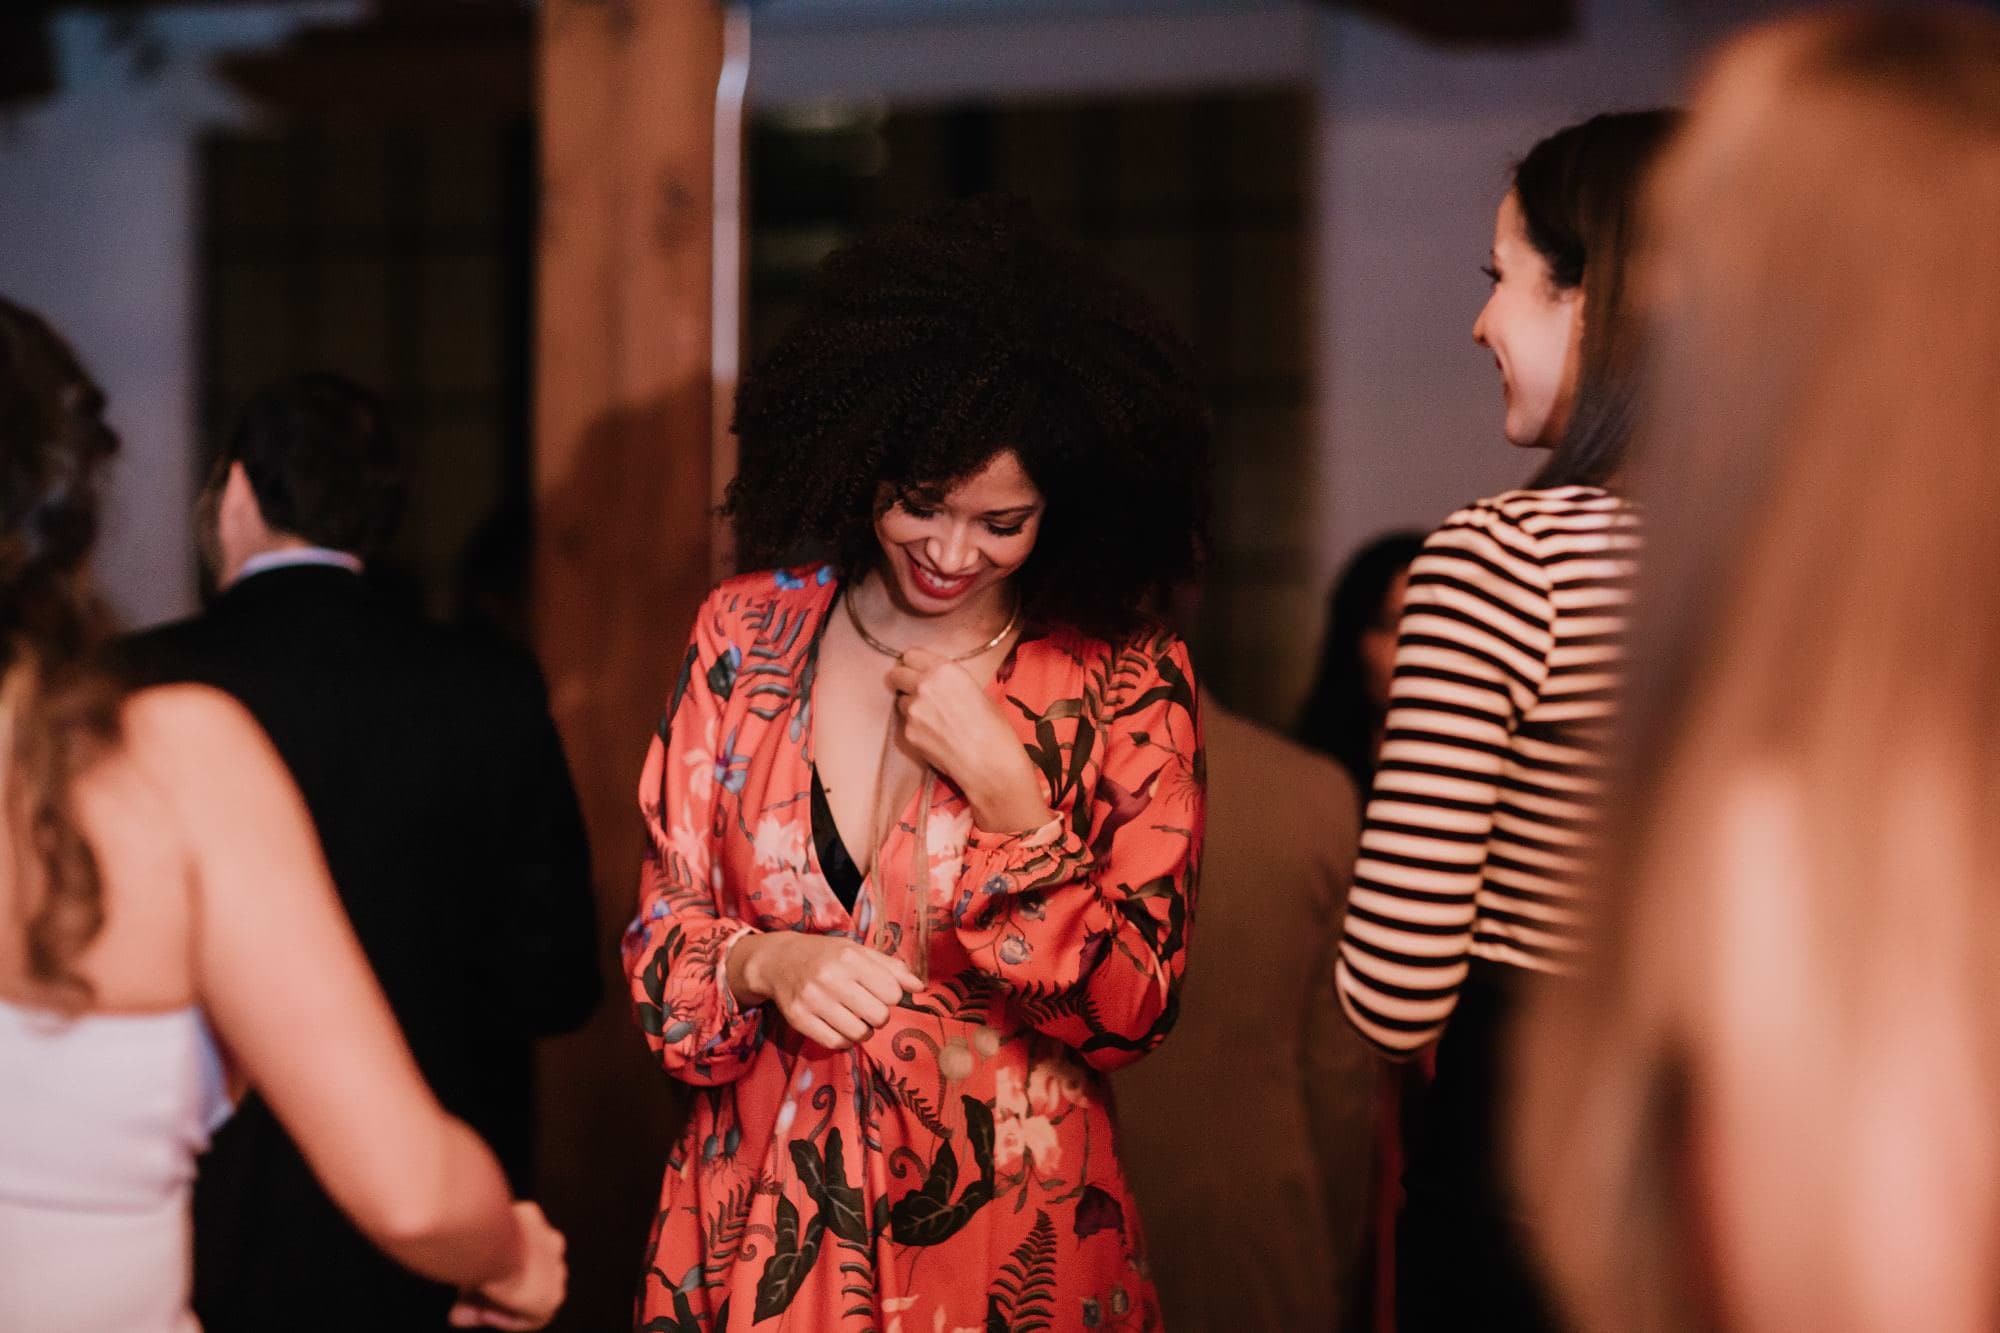 A guest with curly hair in a red dress looks down candidly while dancing